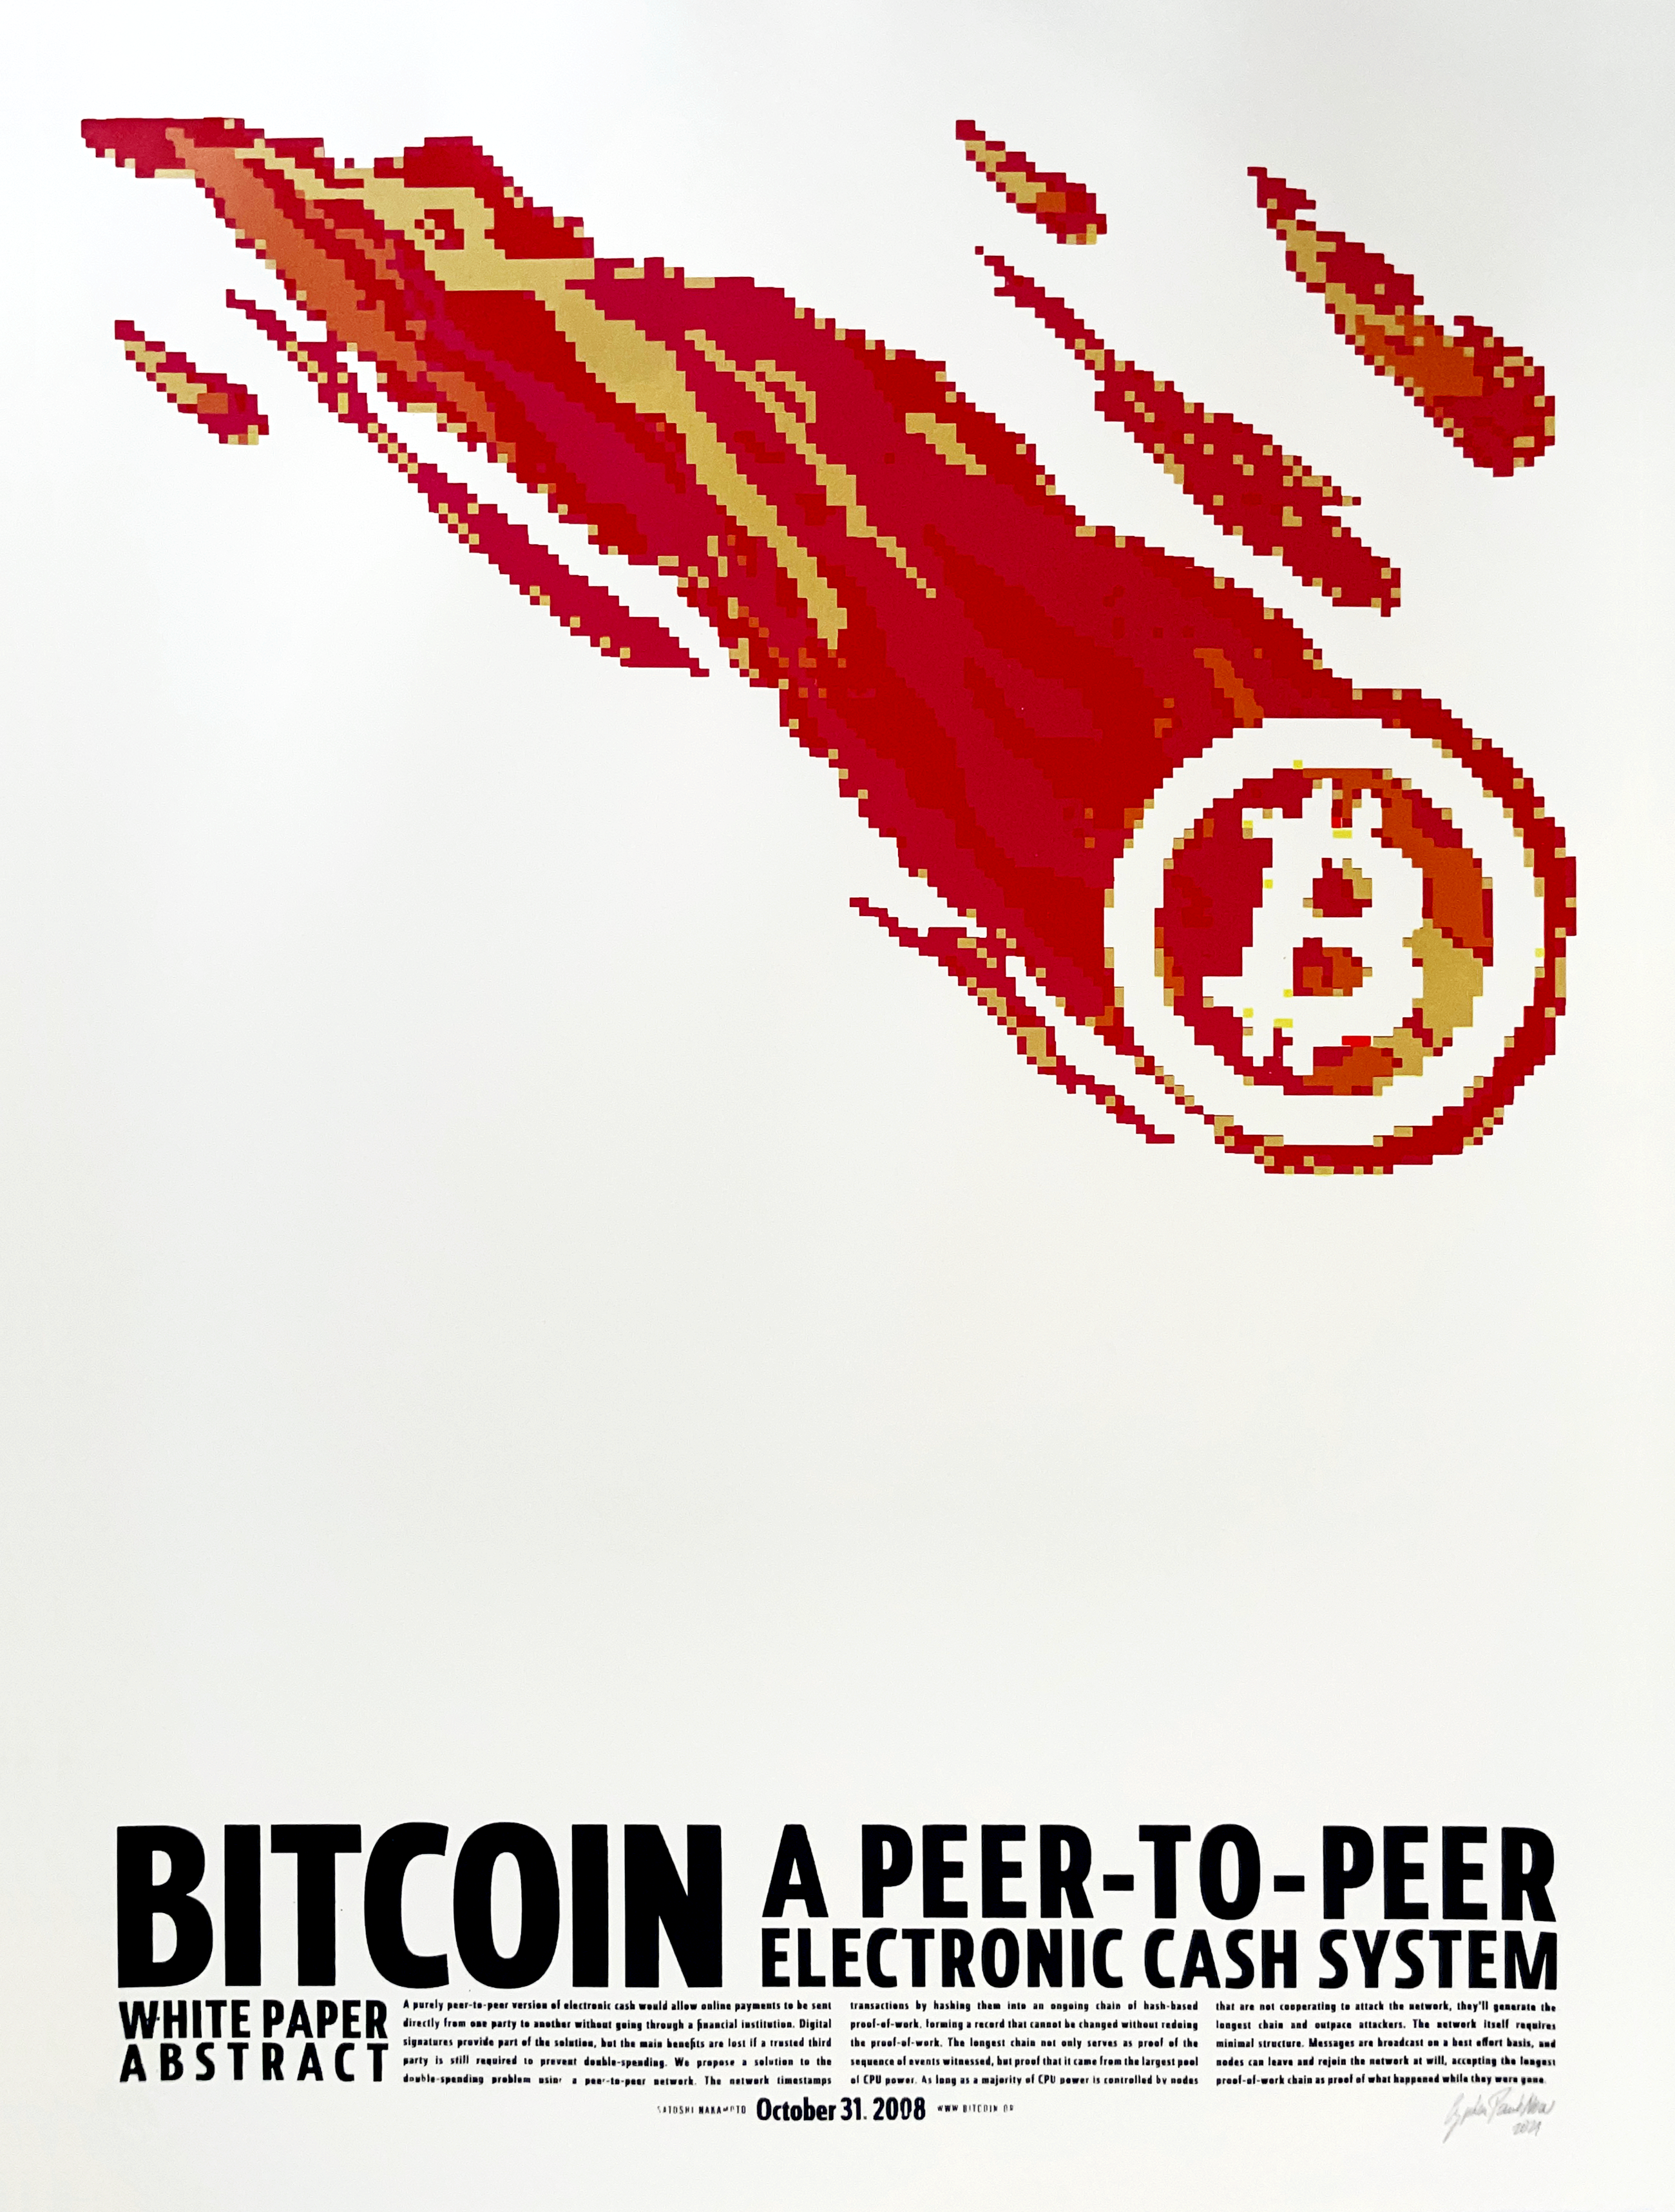 BITCOIN WHITE PAPER ABSTRACT